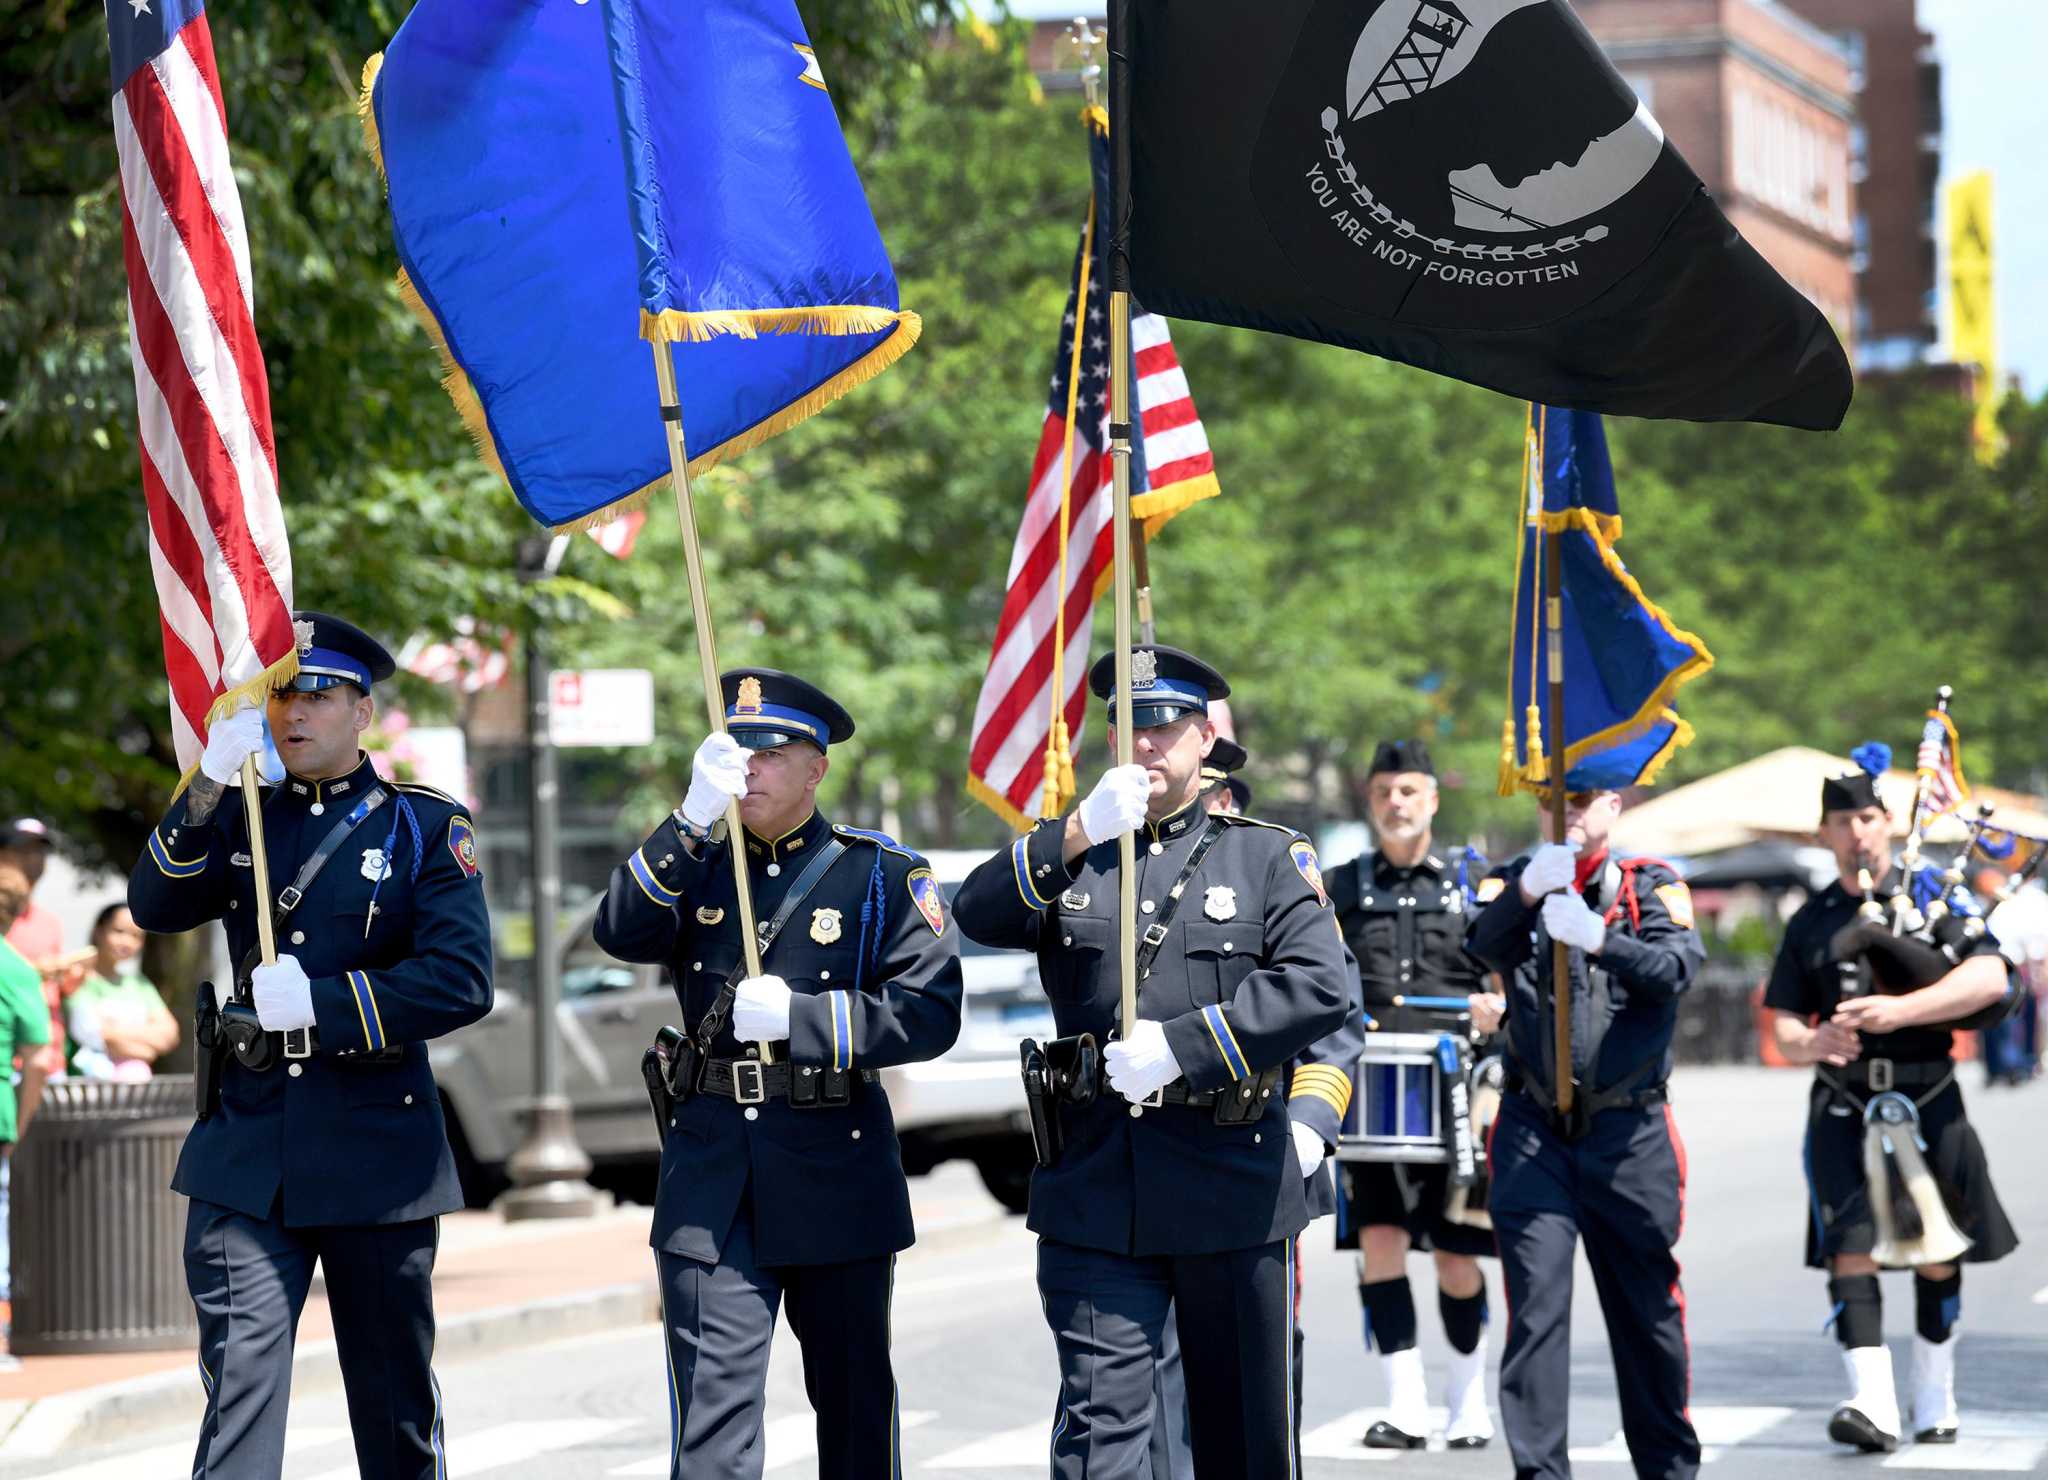 Stamford’s Memorial Day parade is this Sunday. Here’s everything you